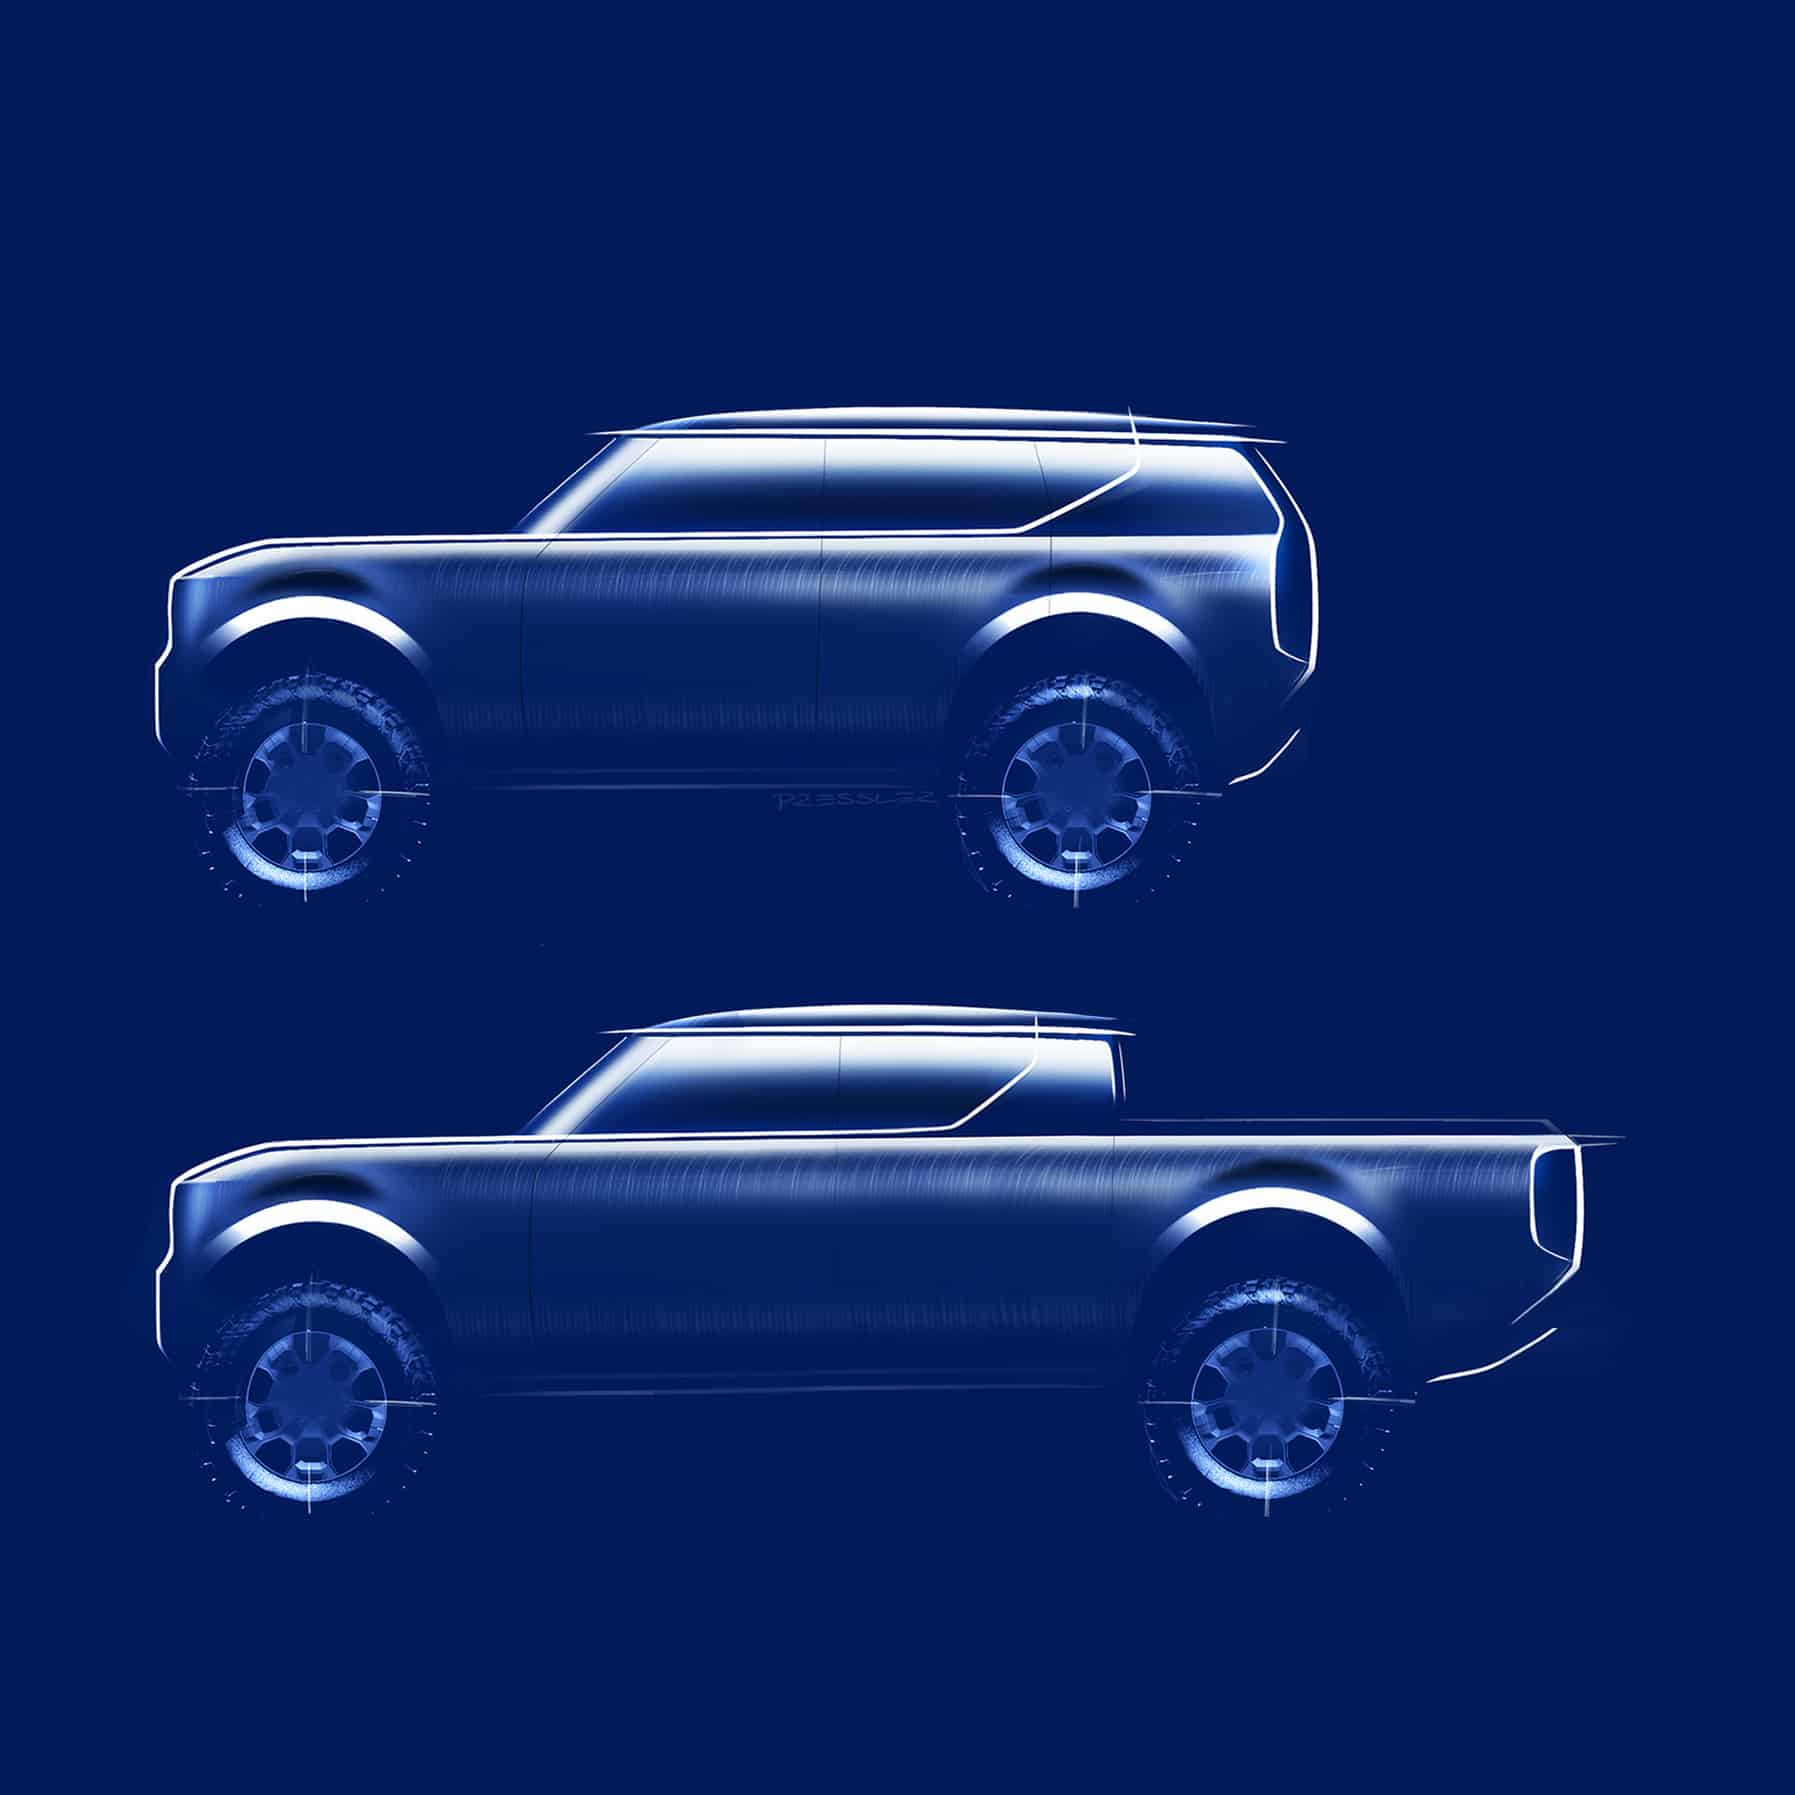 volkswagen-revives-scout-as-an-electric-truck-and-suv